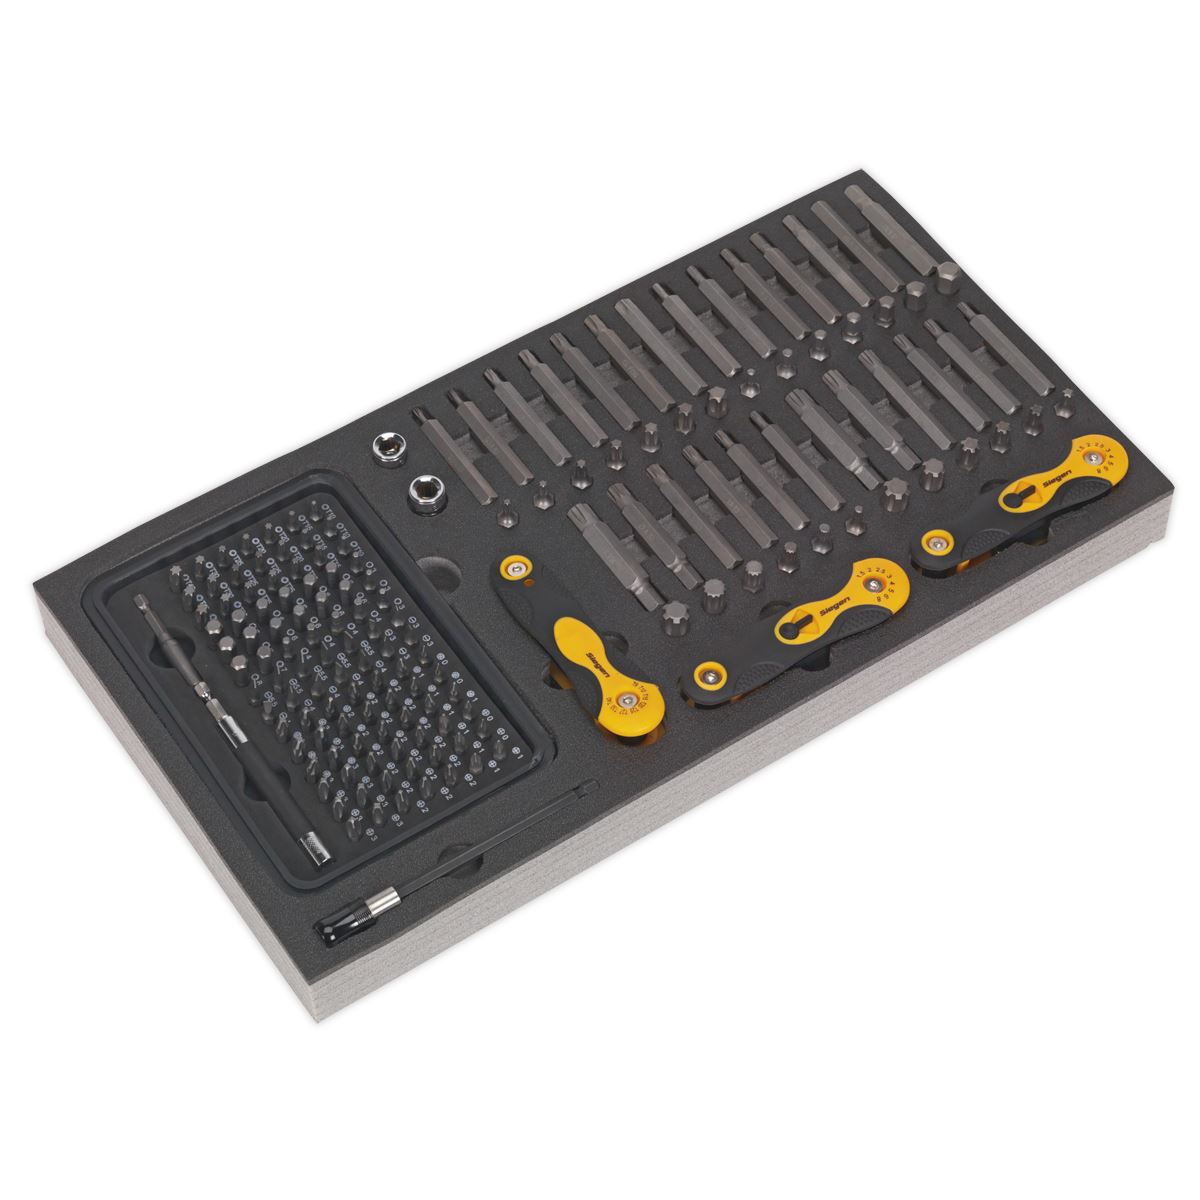 Siegen by Sealey Tool Tray with Specialised Bits & Folding Hex Keys 192pc